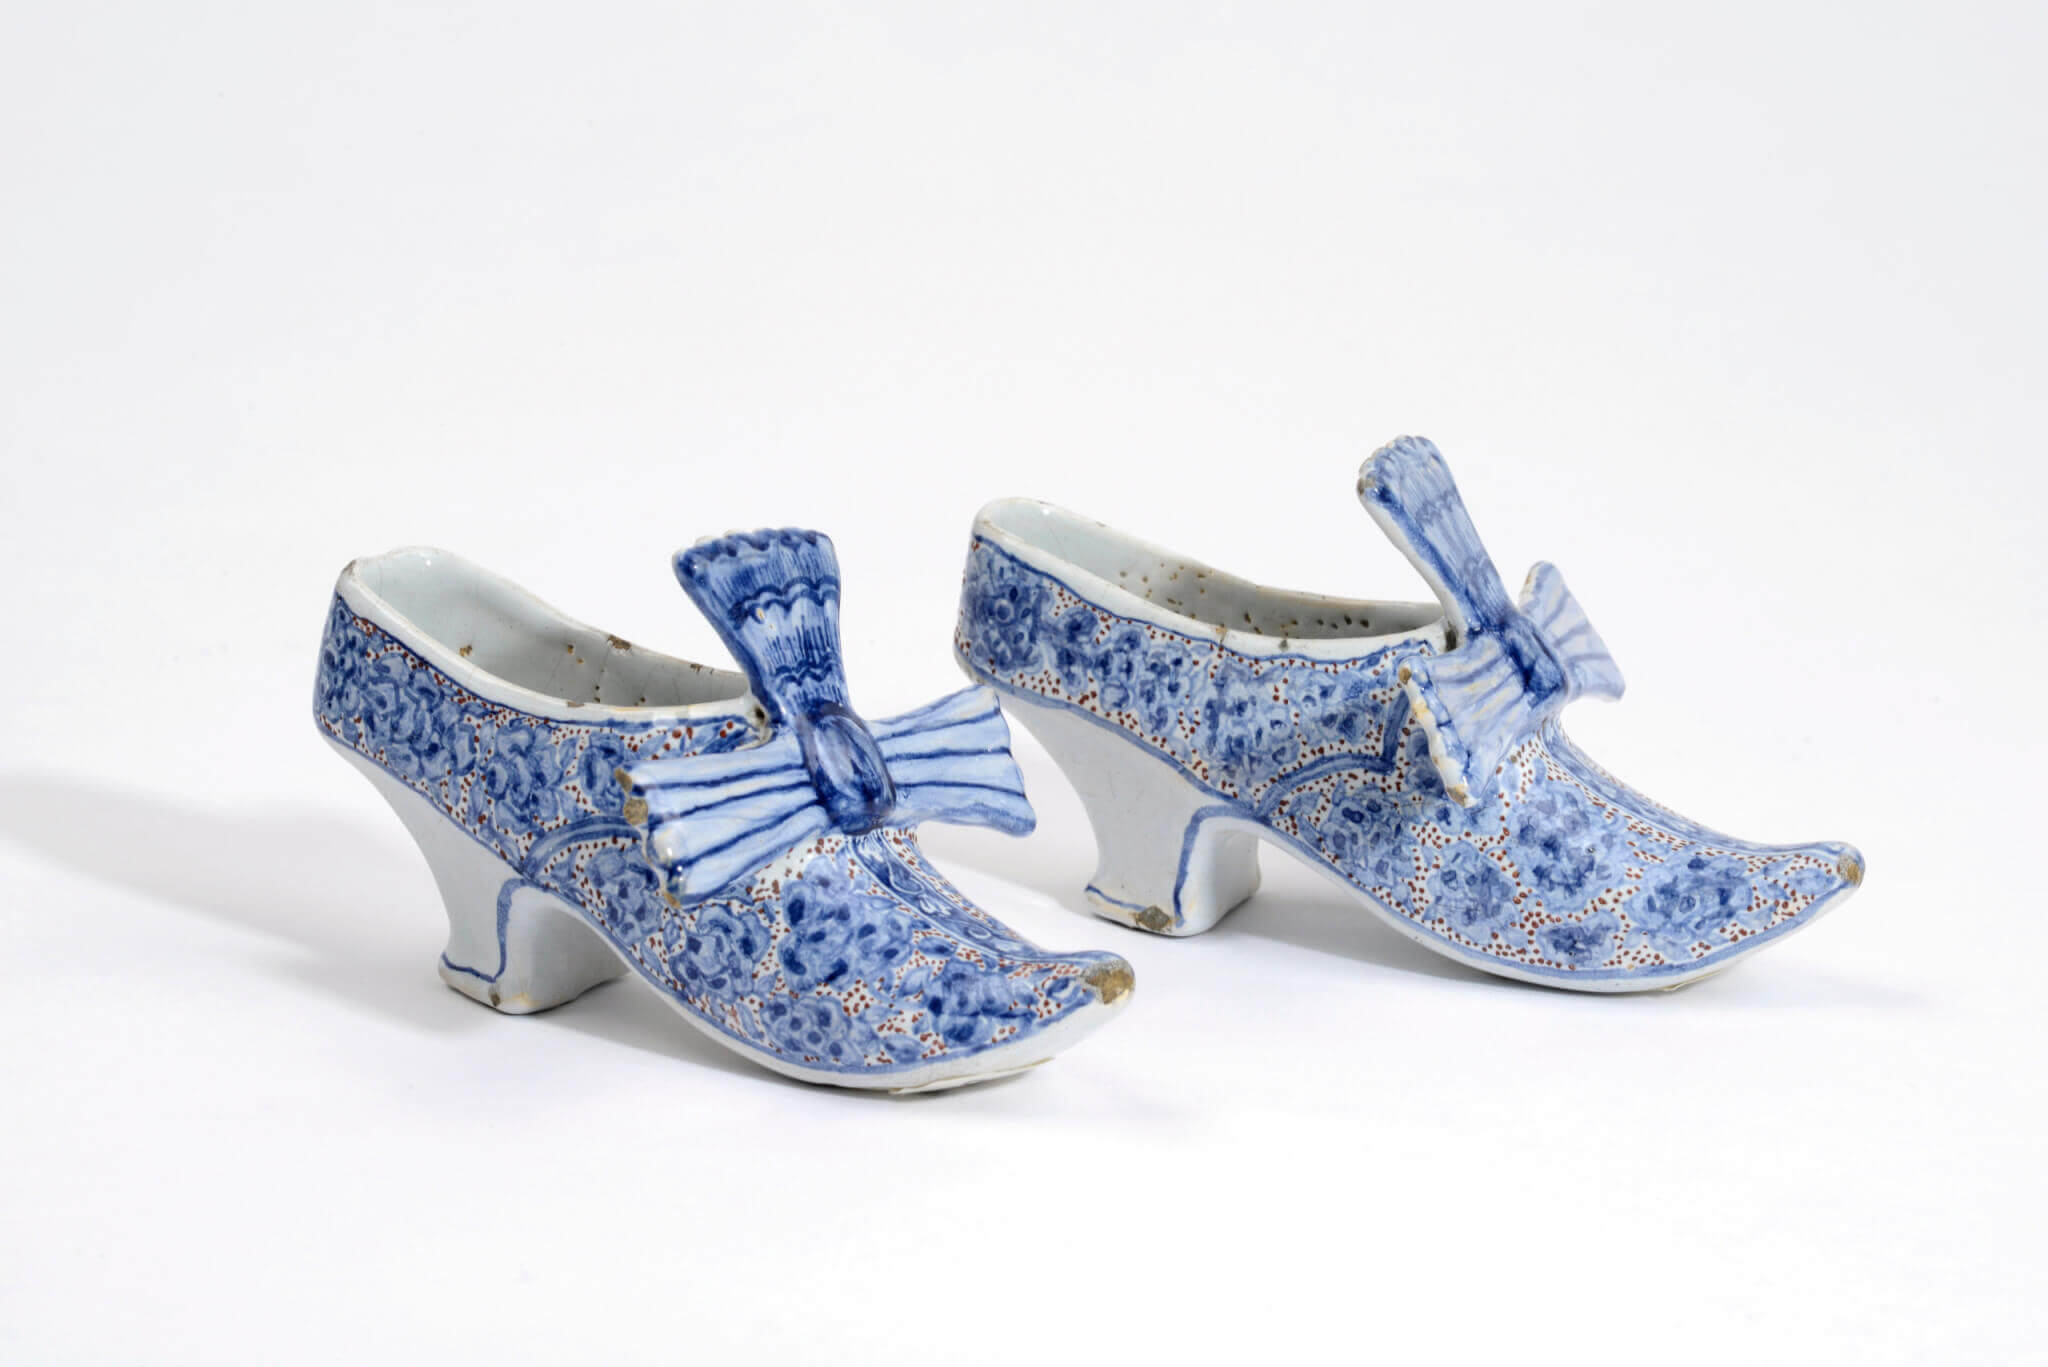 Delftware polychrome models of shoes bows